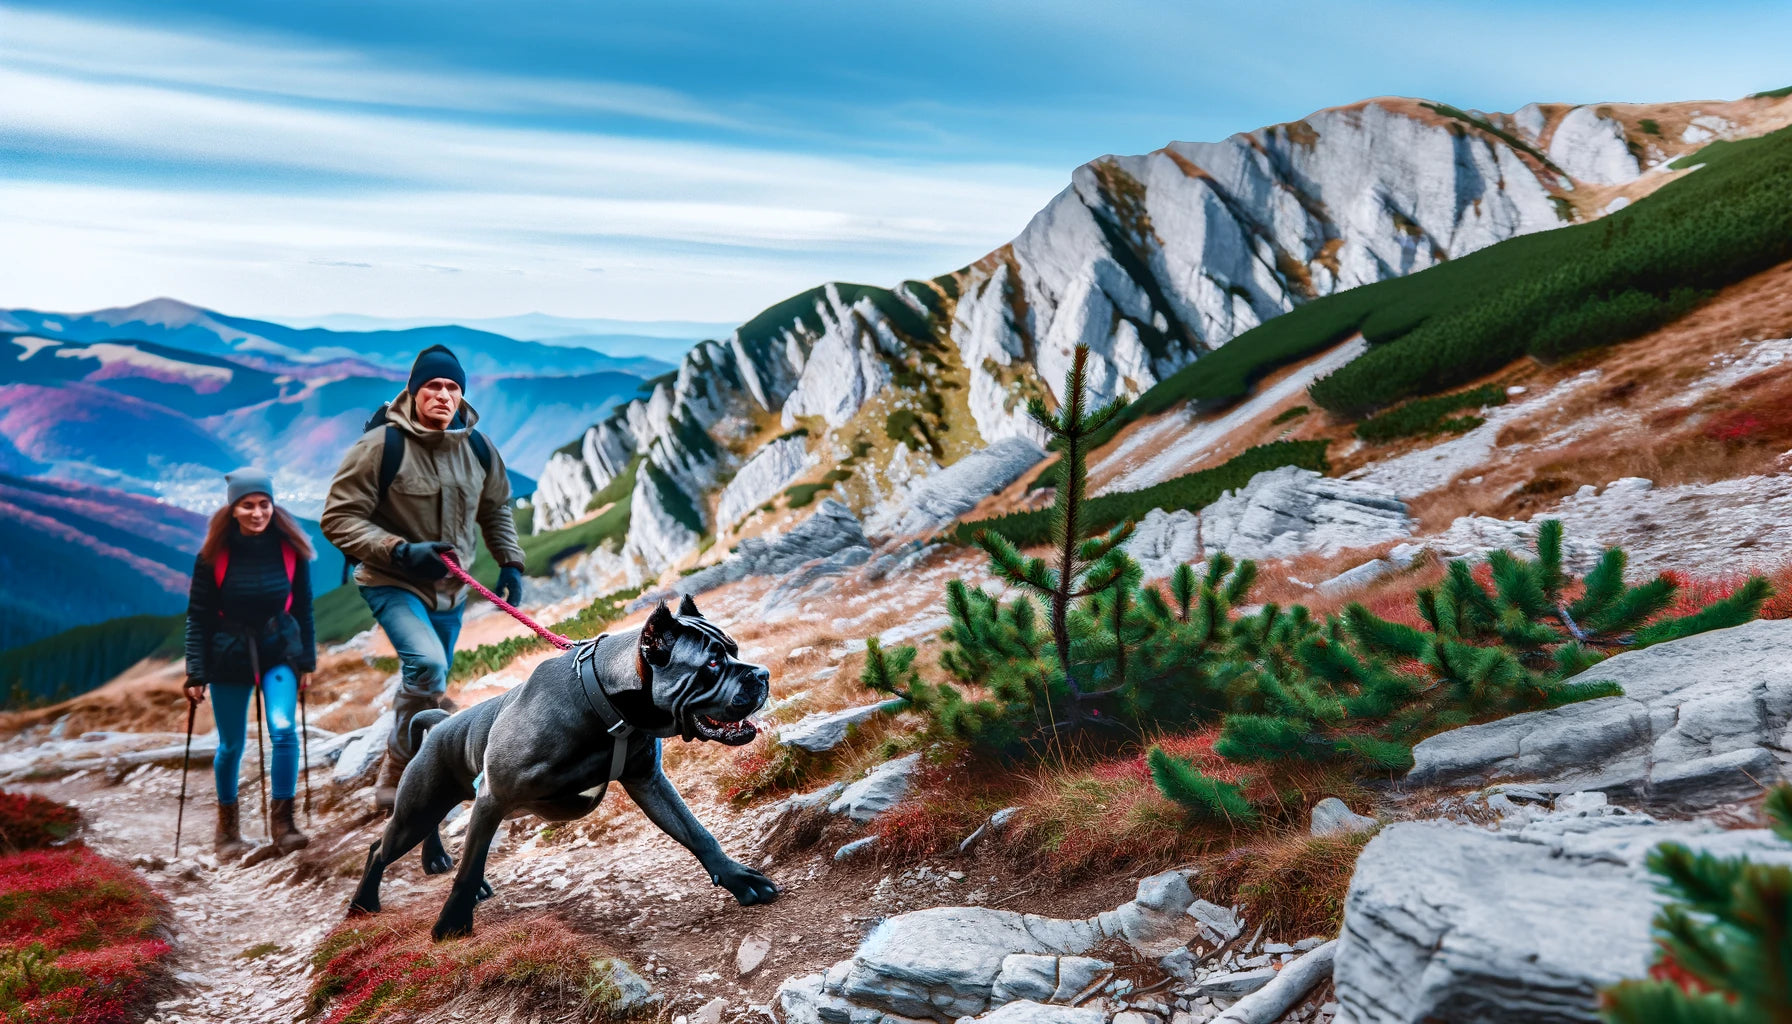 Cane Corso hiking with its owner on a scenic mountain trail.